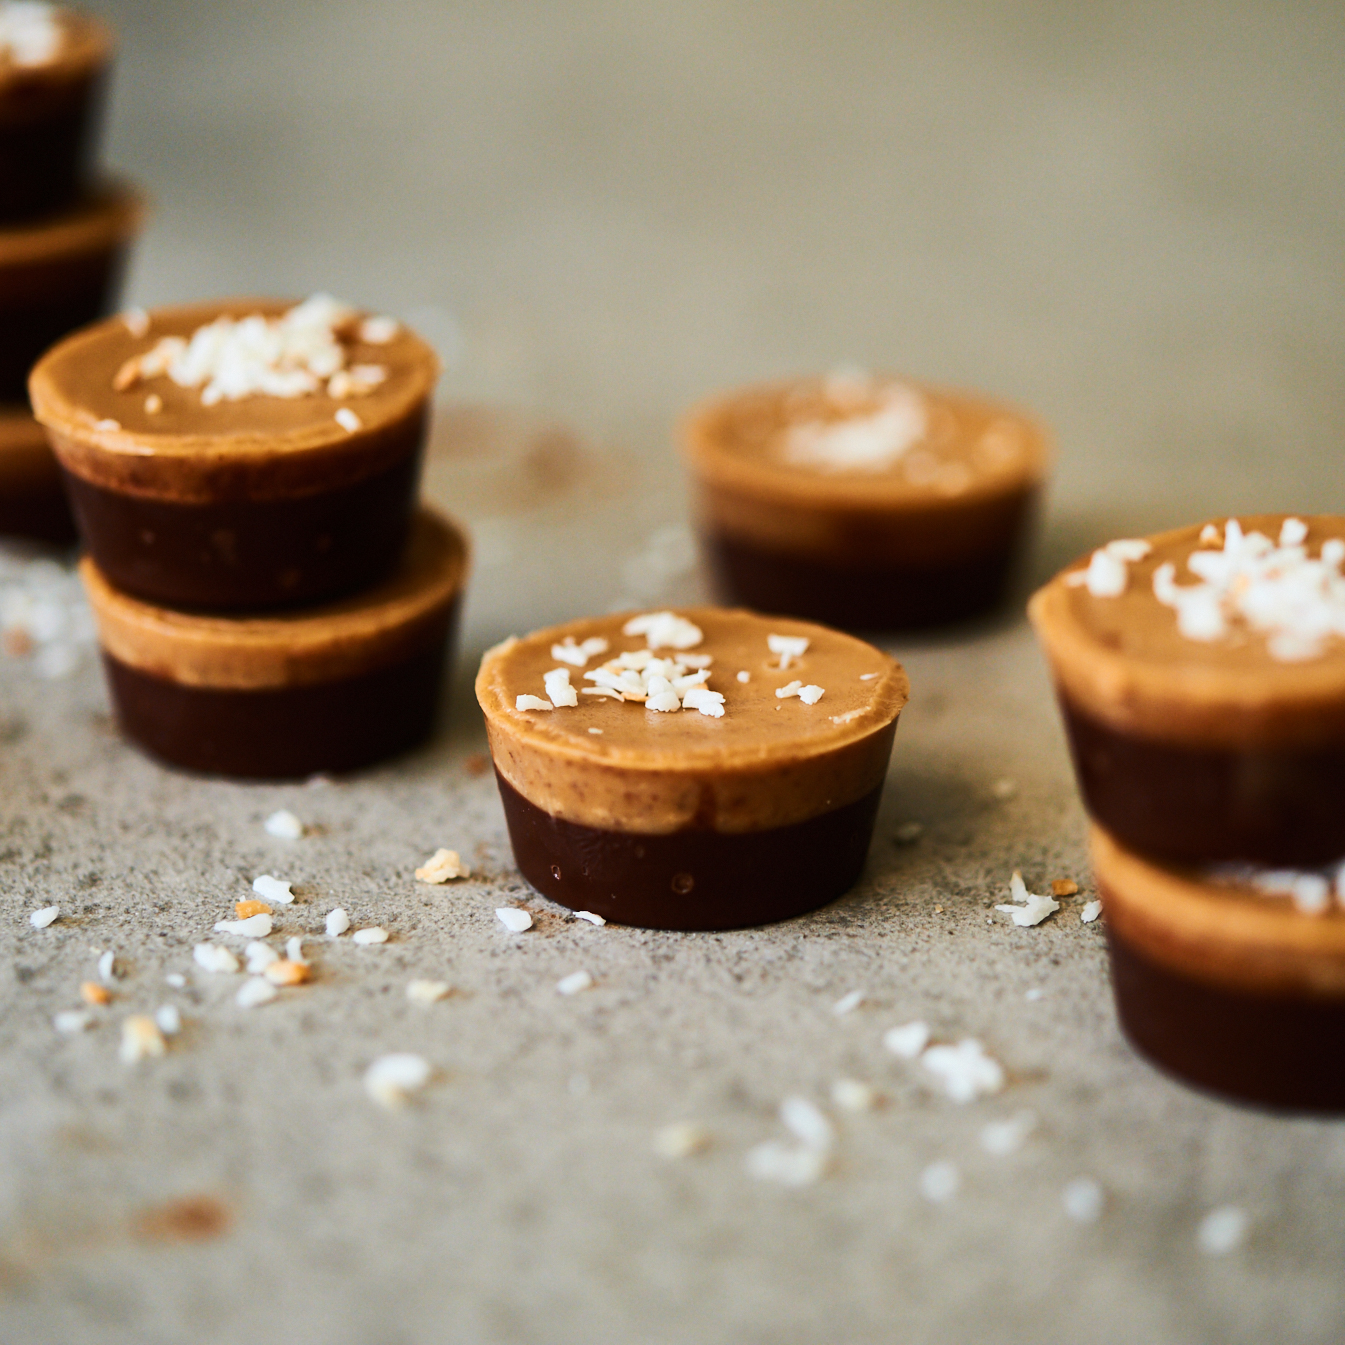 These peanut butter cups can also be made with almond butter instead. We love combining chocolate and nut butter to make an alternative to reese's cups